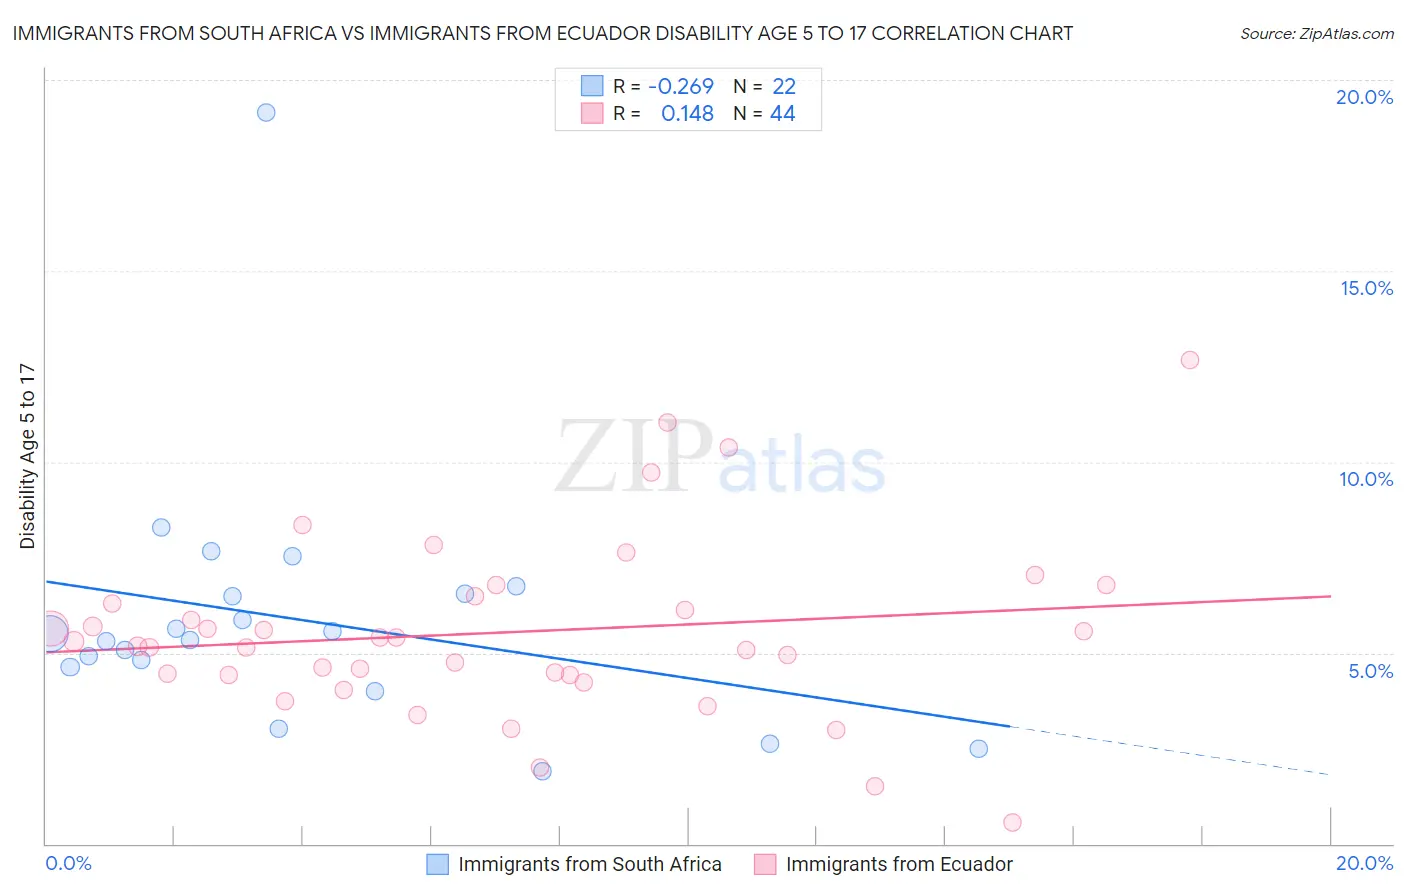 Immigrants from South Africa vs Immigrants from Ecuador Disability Age 5 to 17